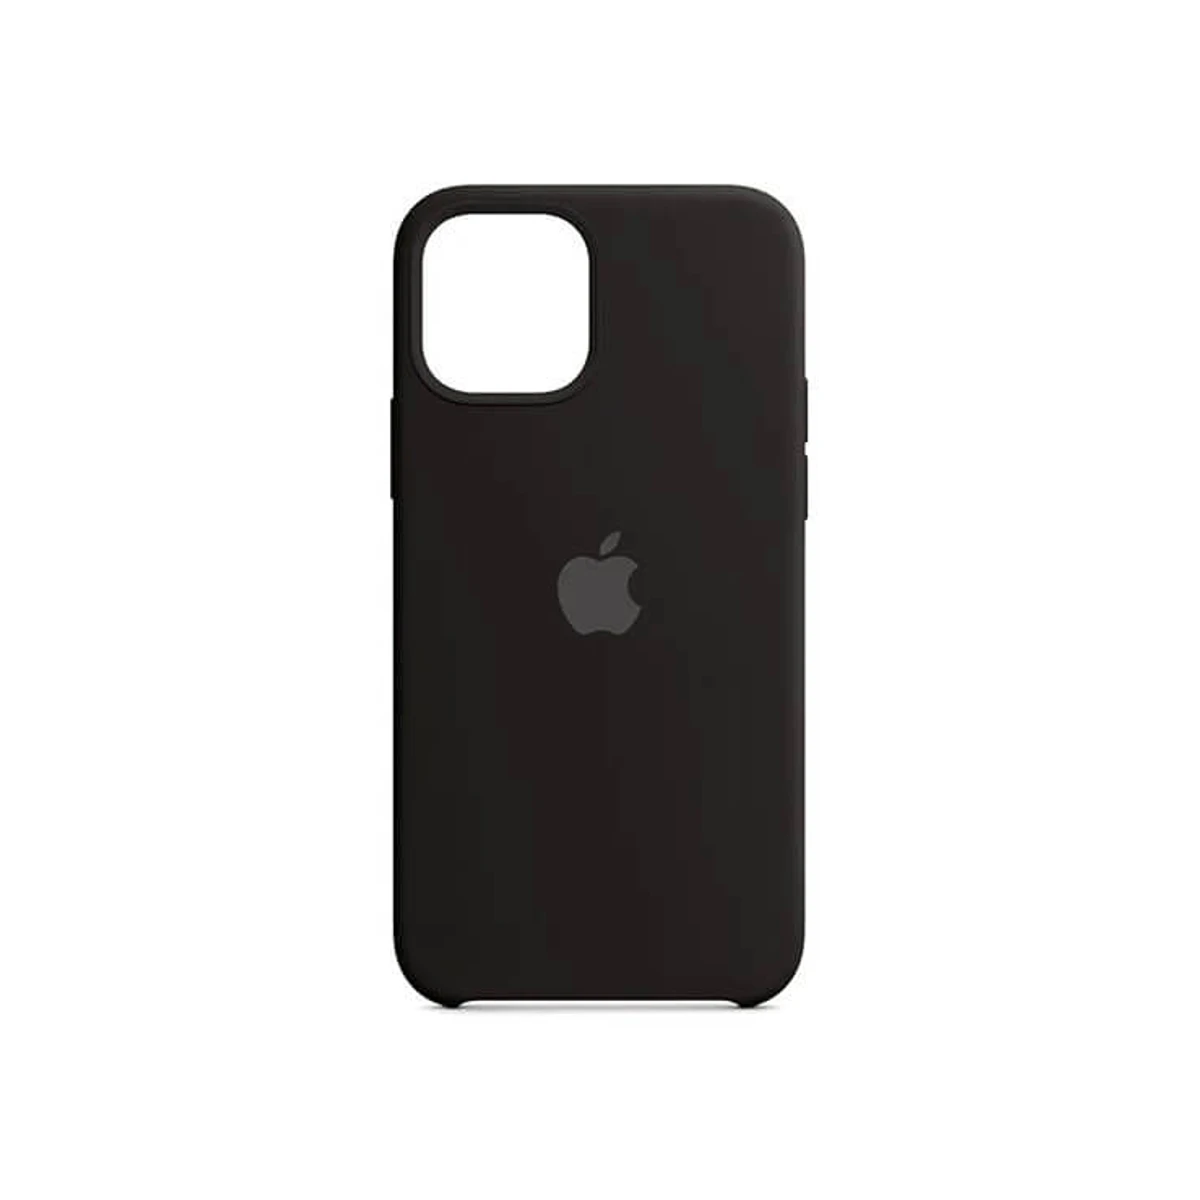 Silicone Case For iPhone 11